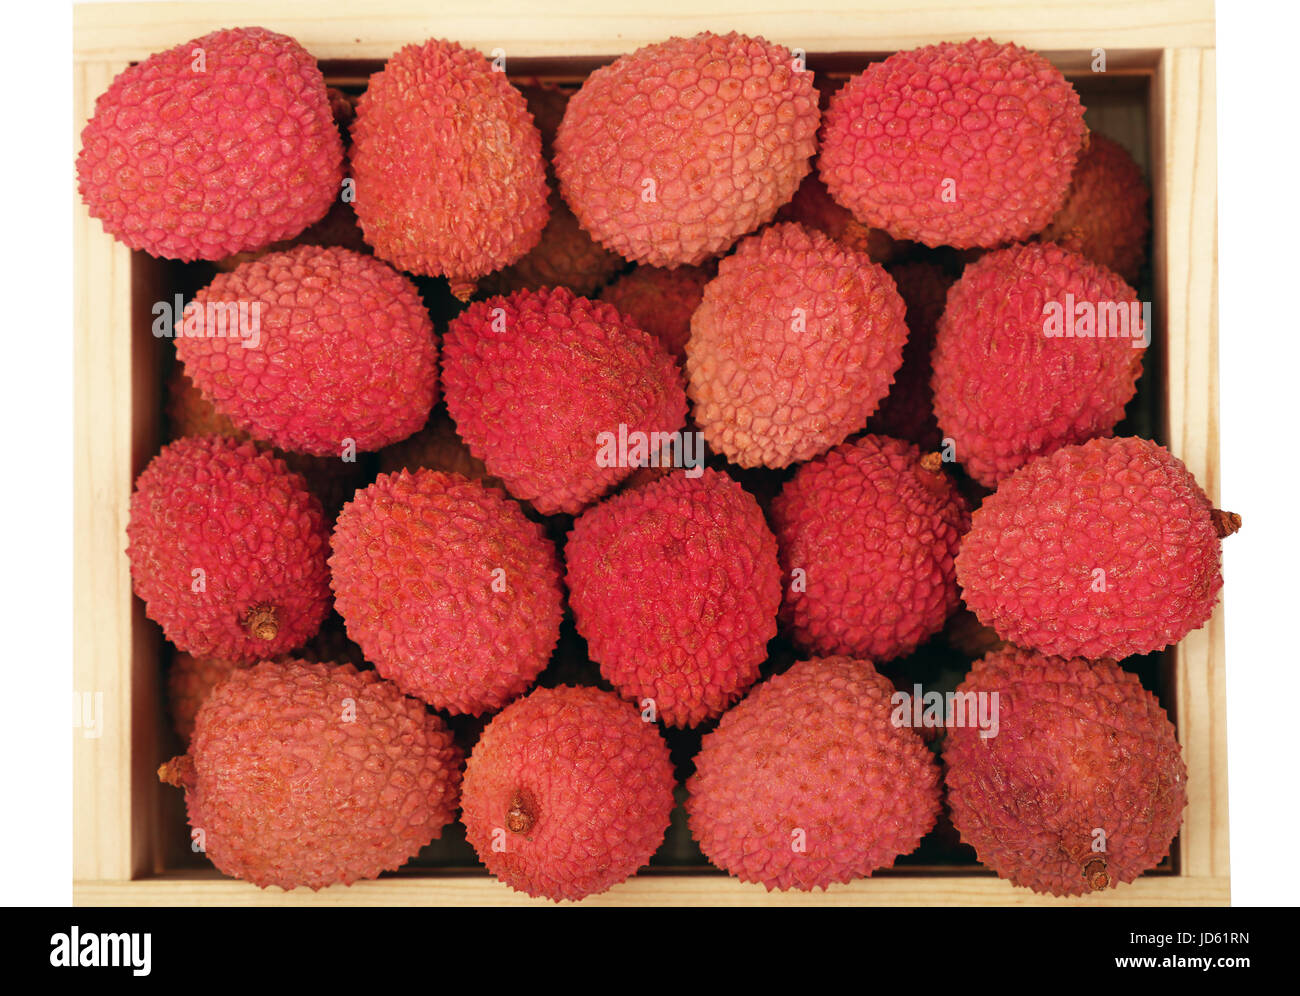 Heap of fresh picked red ripe litchee (Litchi chinensis) tropical fruits in wooden container box isolated on white background, close up, elevated top  Stock Photo